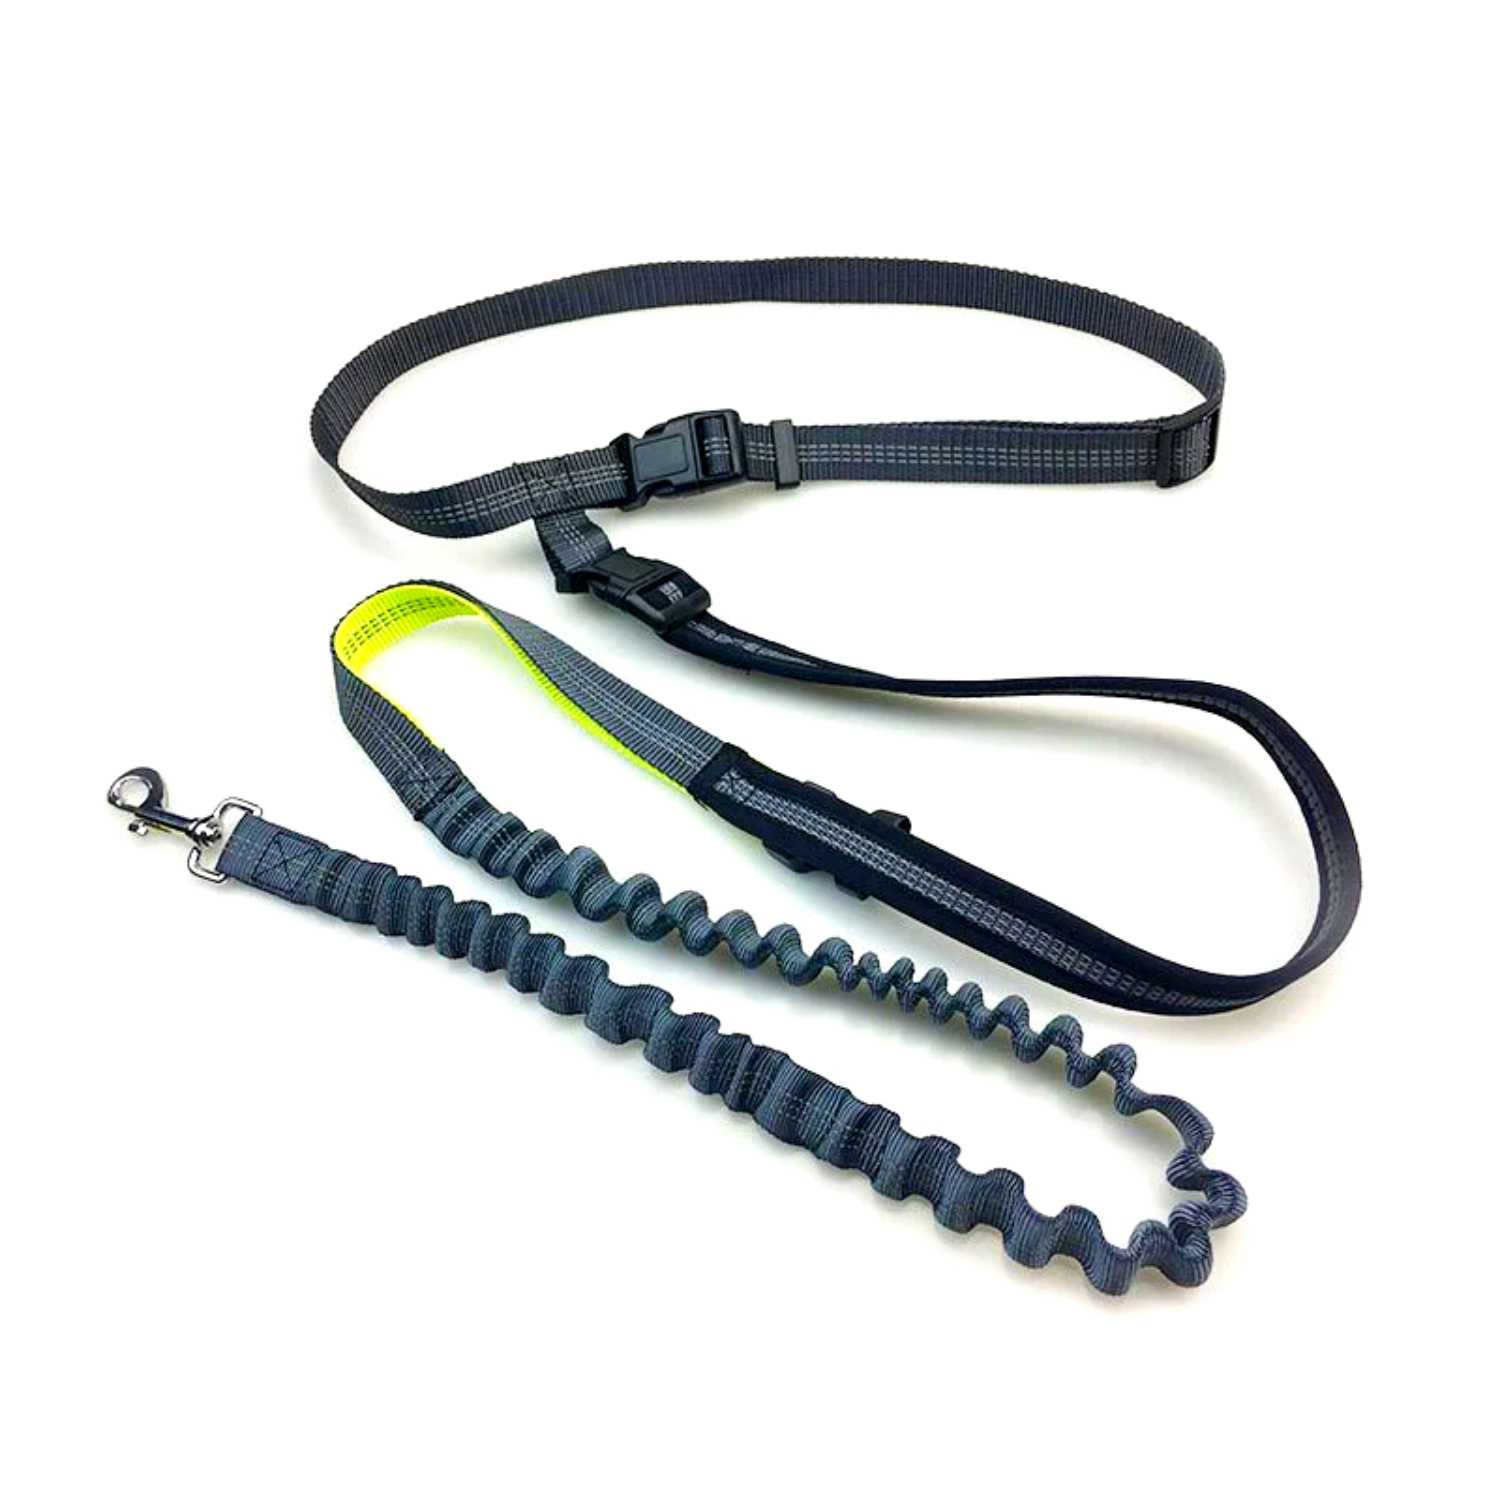 Reflective Hands Free Dog Leash with Adjustable Waist Bag for Running